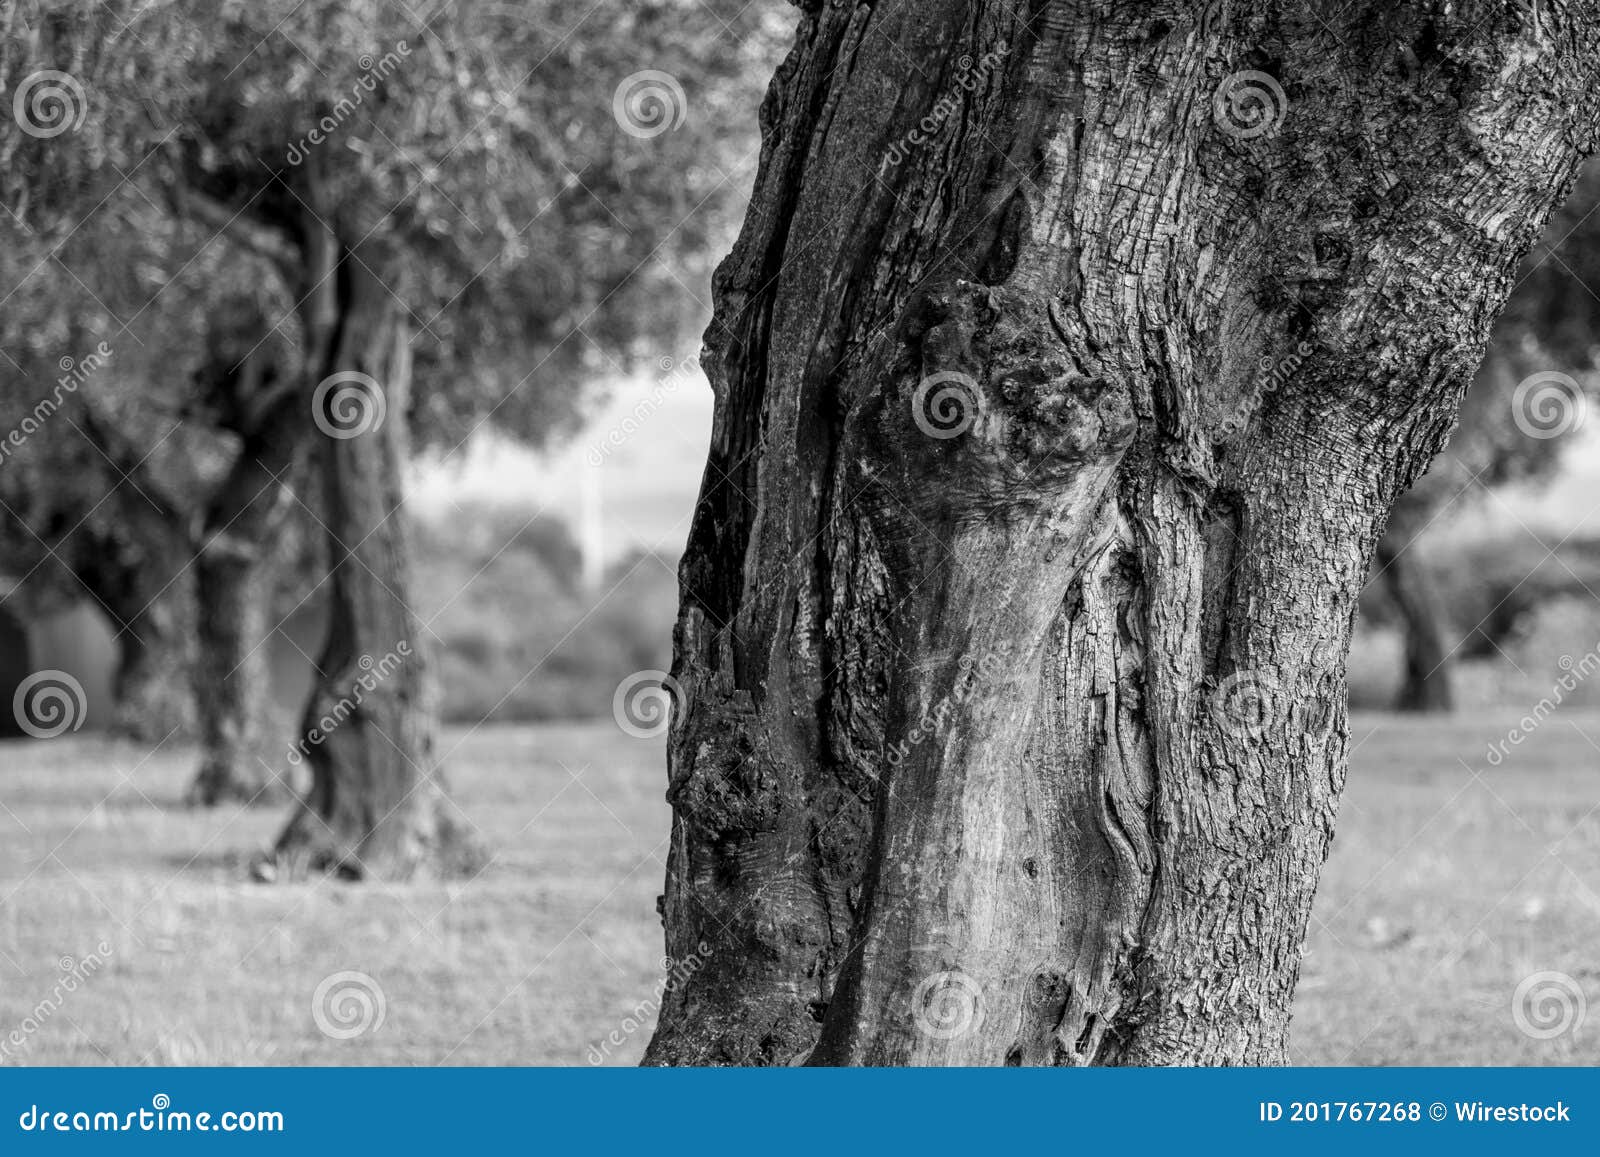 close-up of a row of olive trees